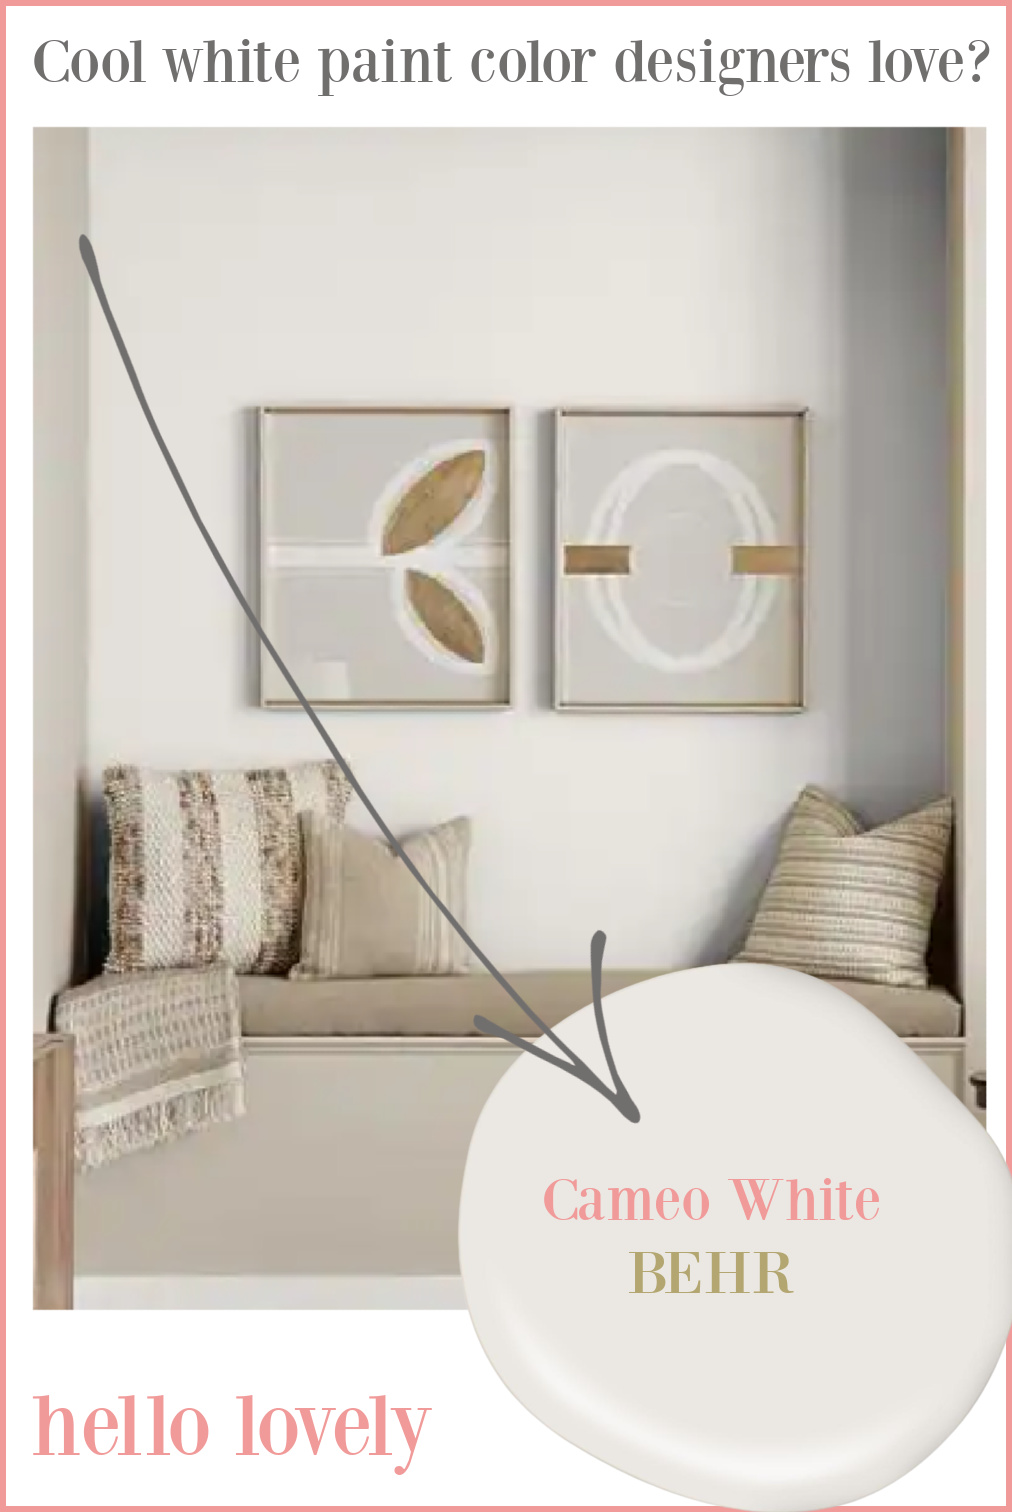 Cameo White paint color by Behr - Hello Lovely Studio. #cameowhite #leanneford